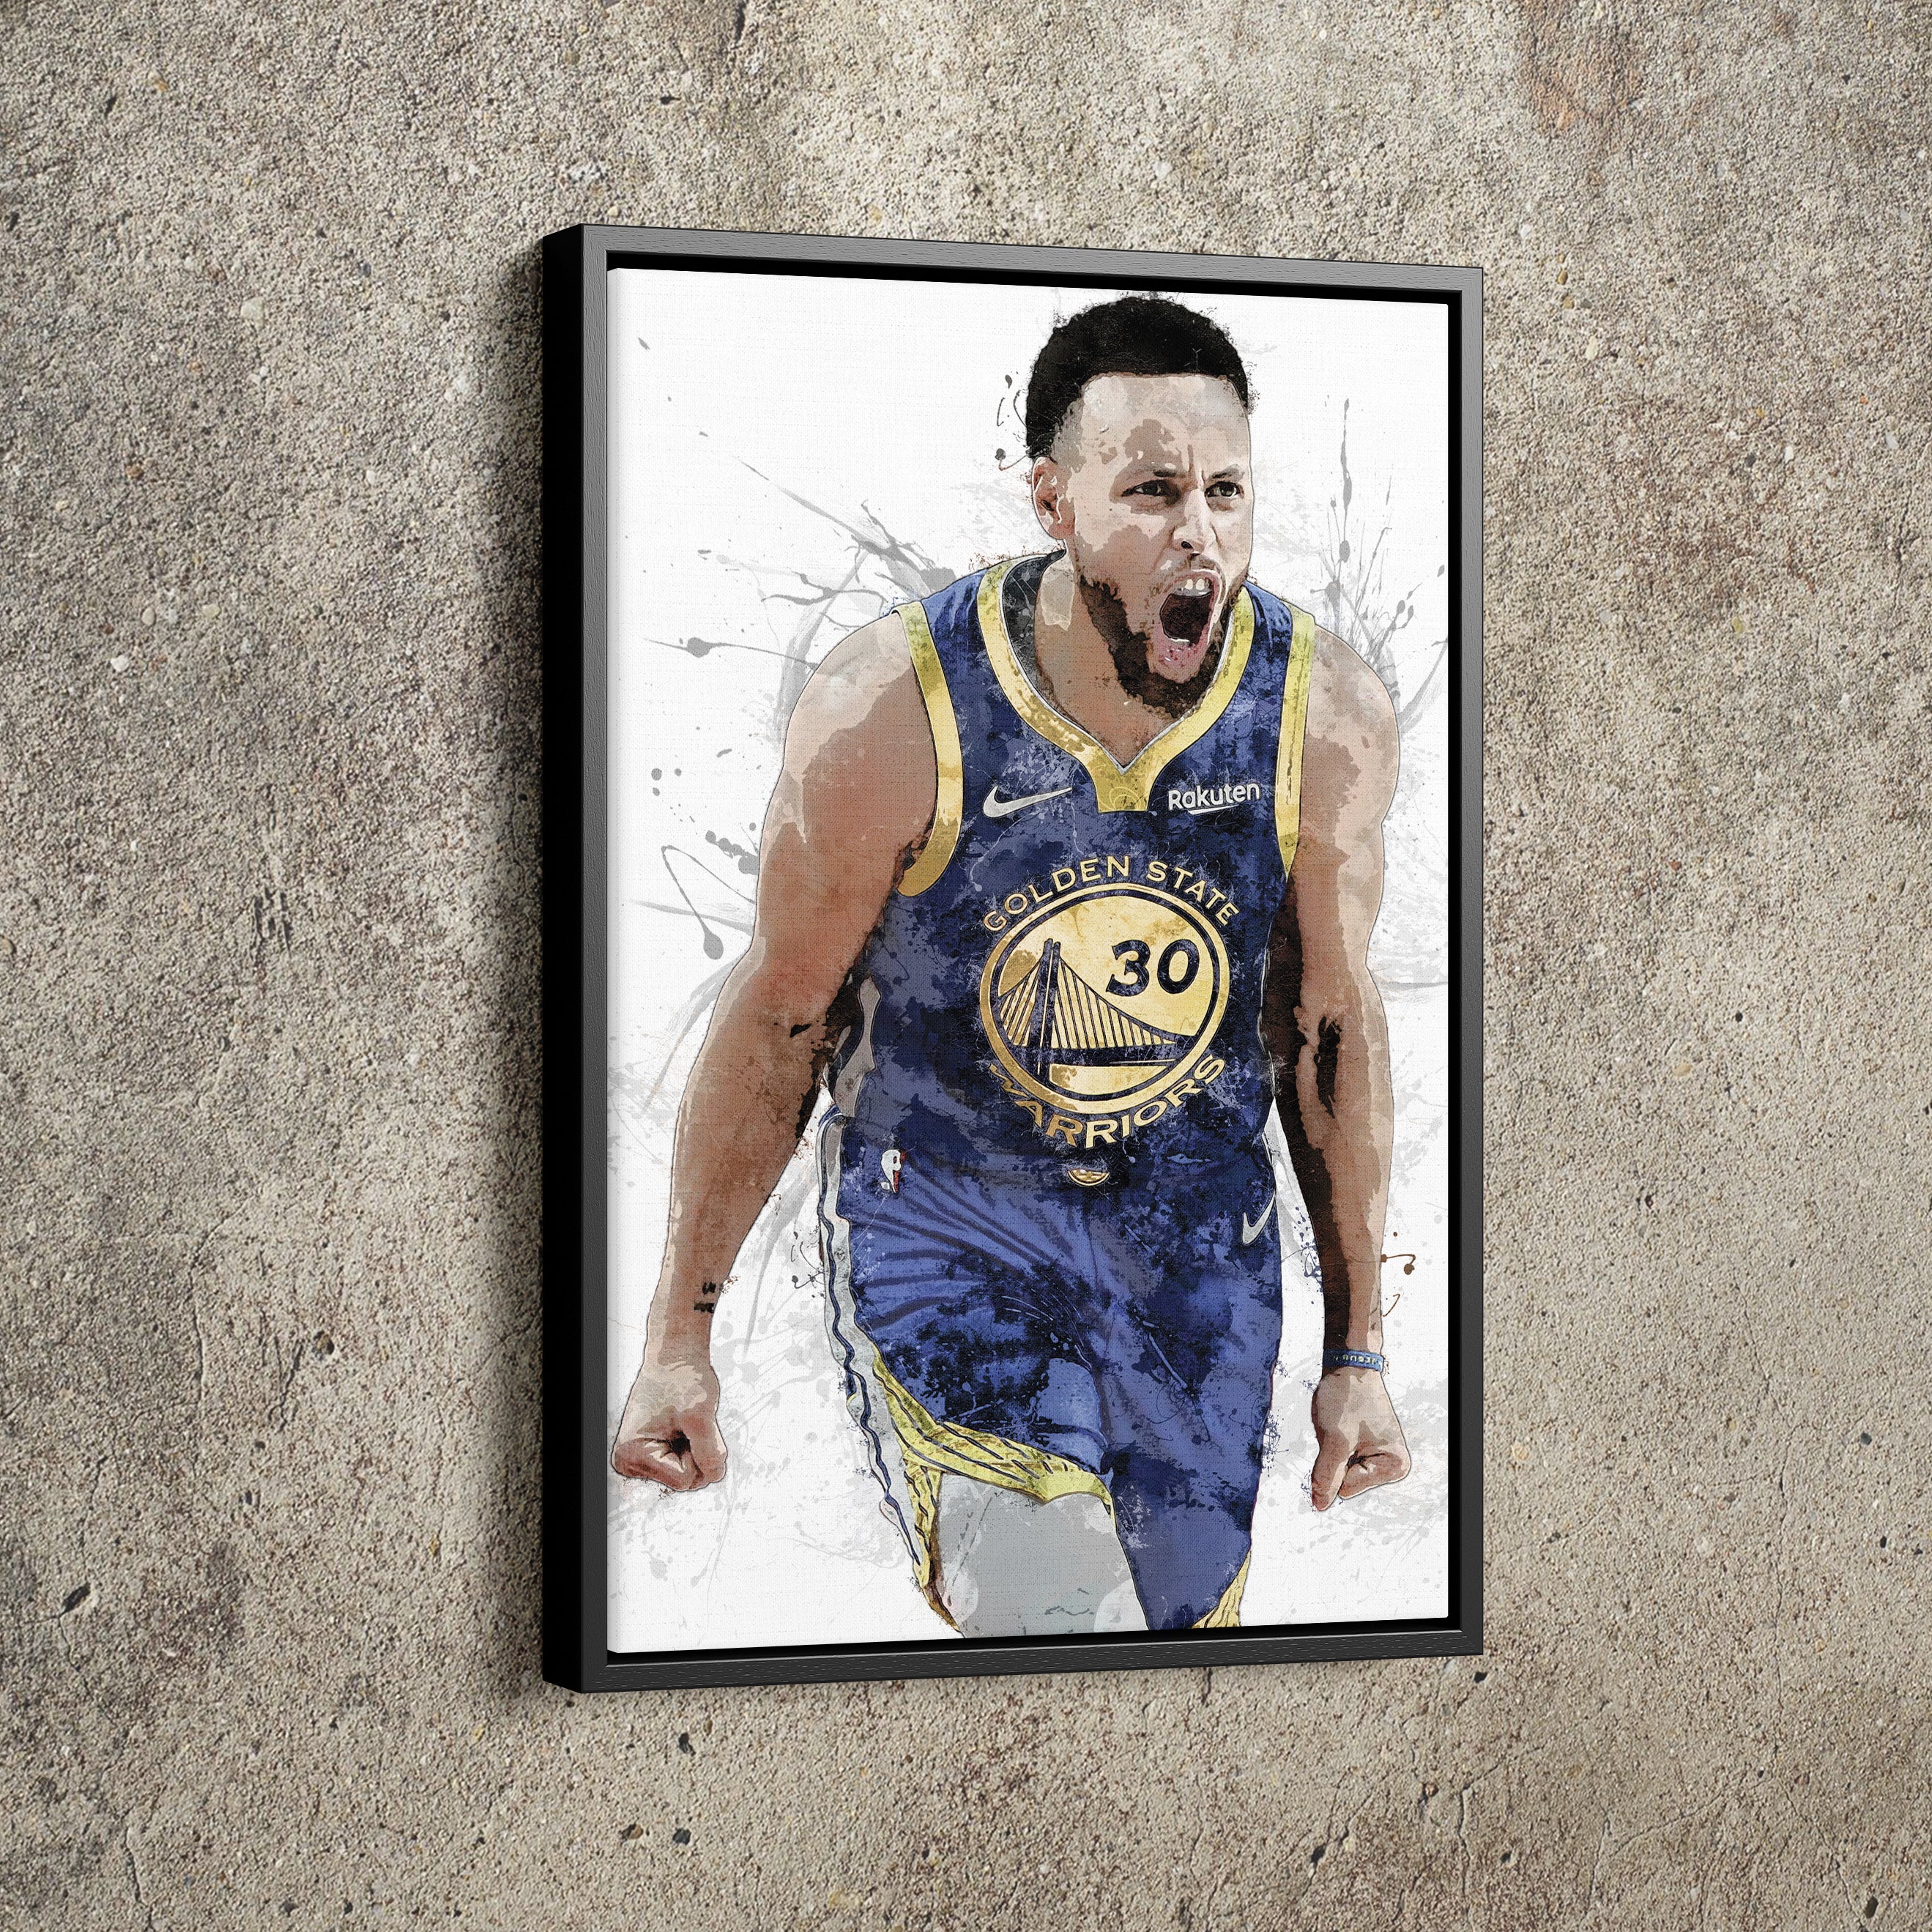 Golden State Steph Curry basketball jersey (youth small